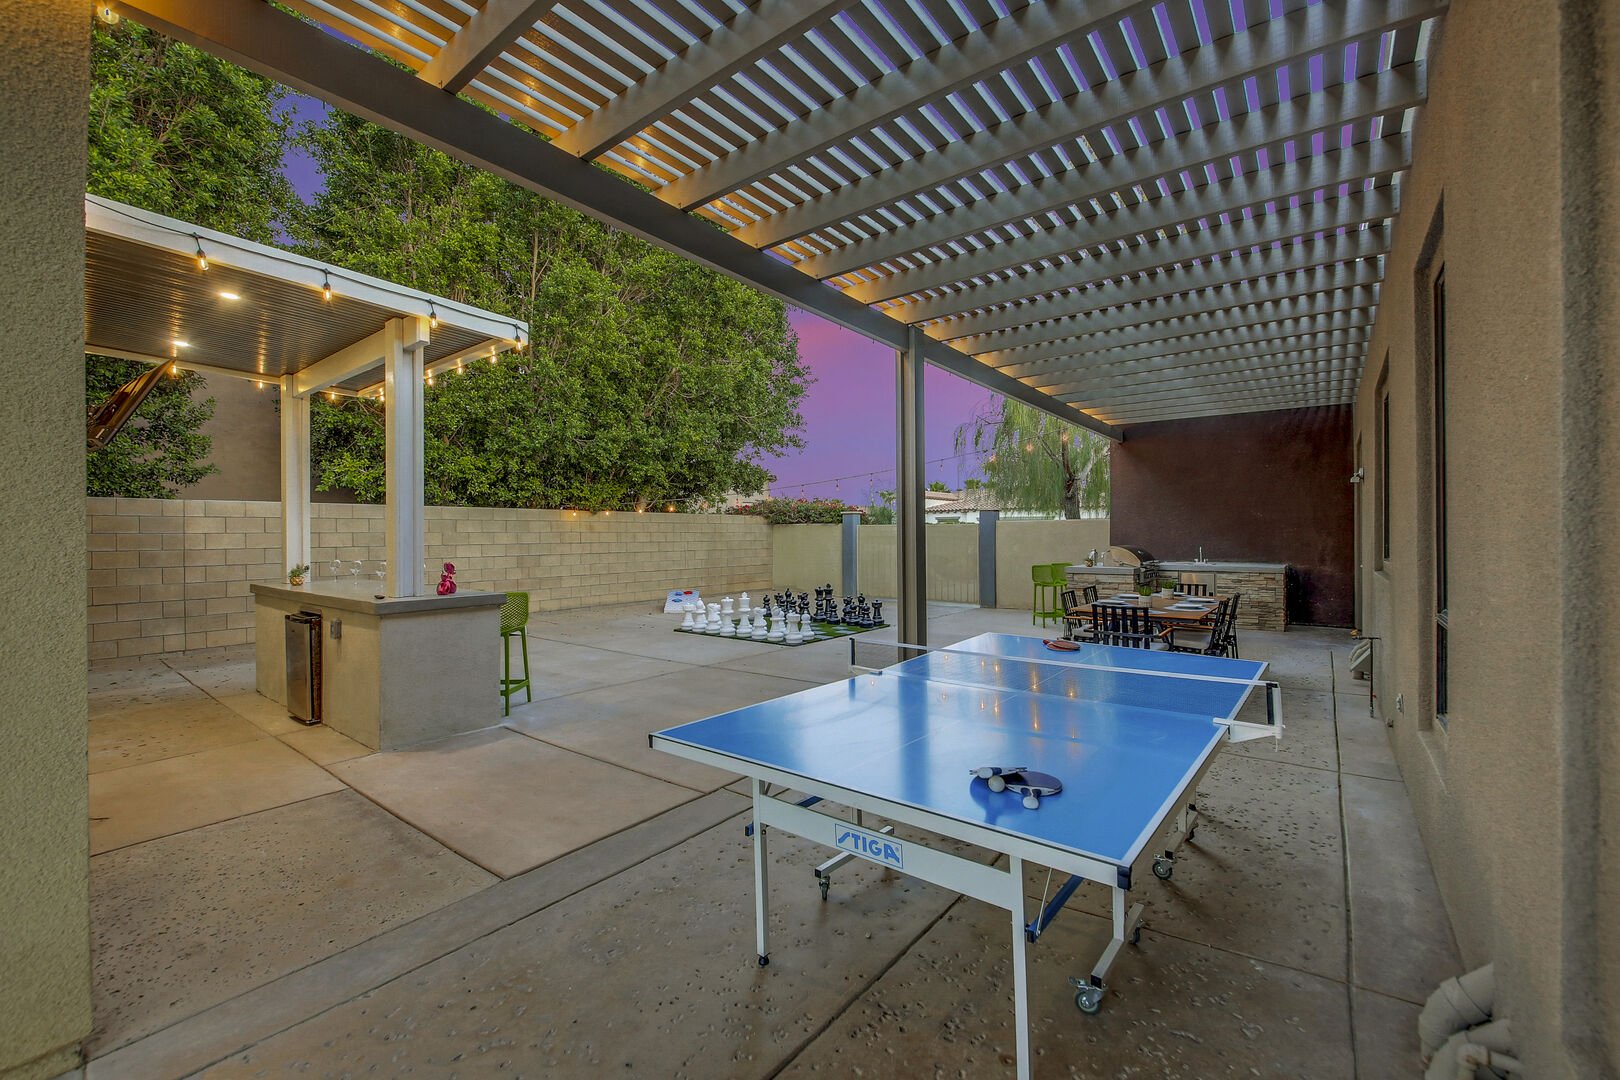 Challenge a friend to a competitive game of Bocce Ball or Ping Pong.